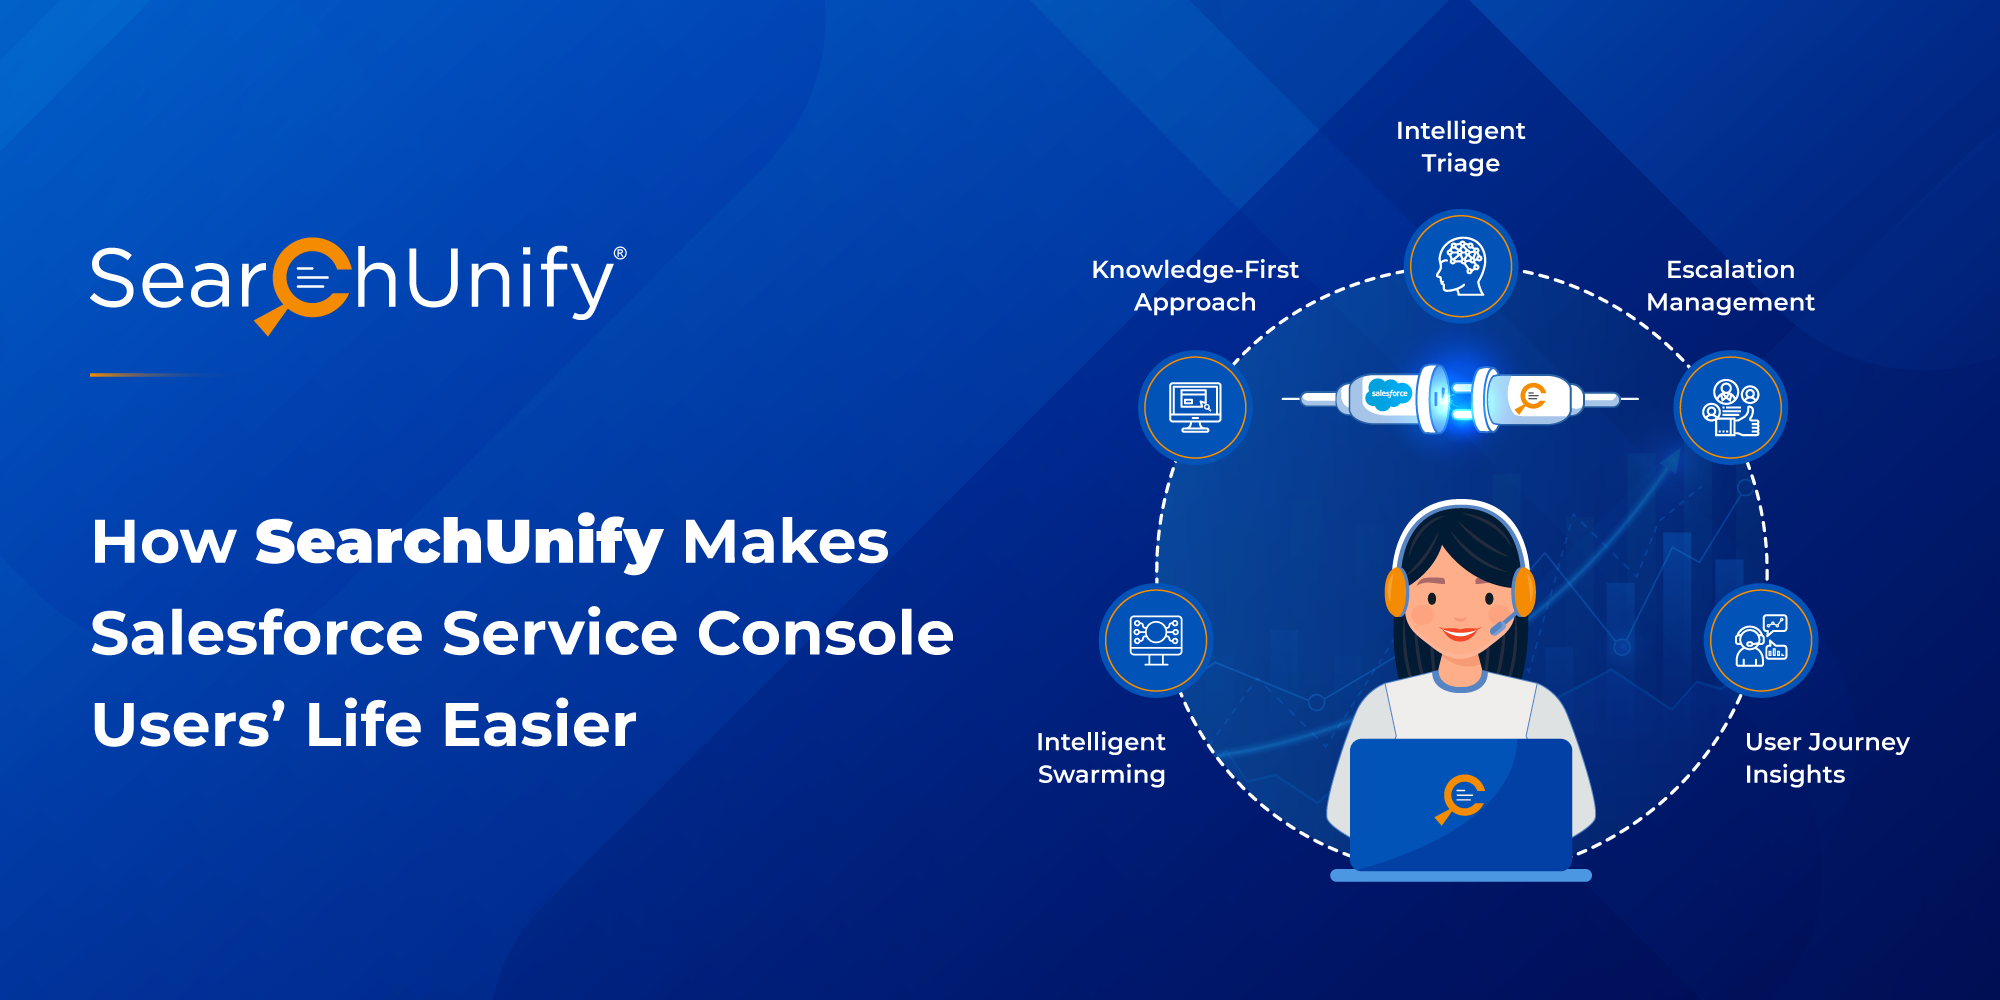 How SearchUnify Makes Salesforce Service Console Users’ Life Easier